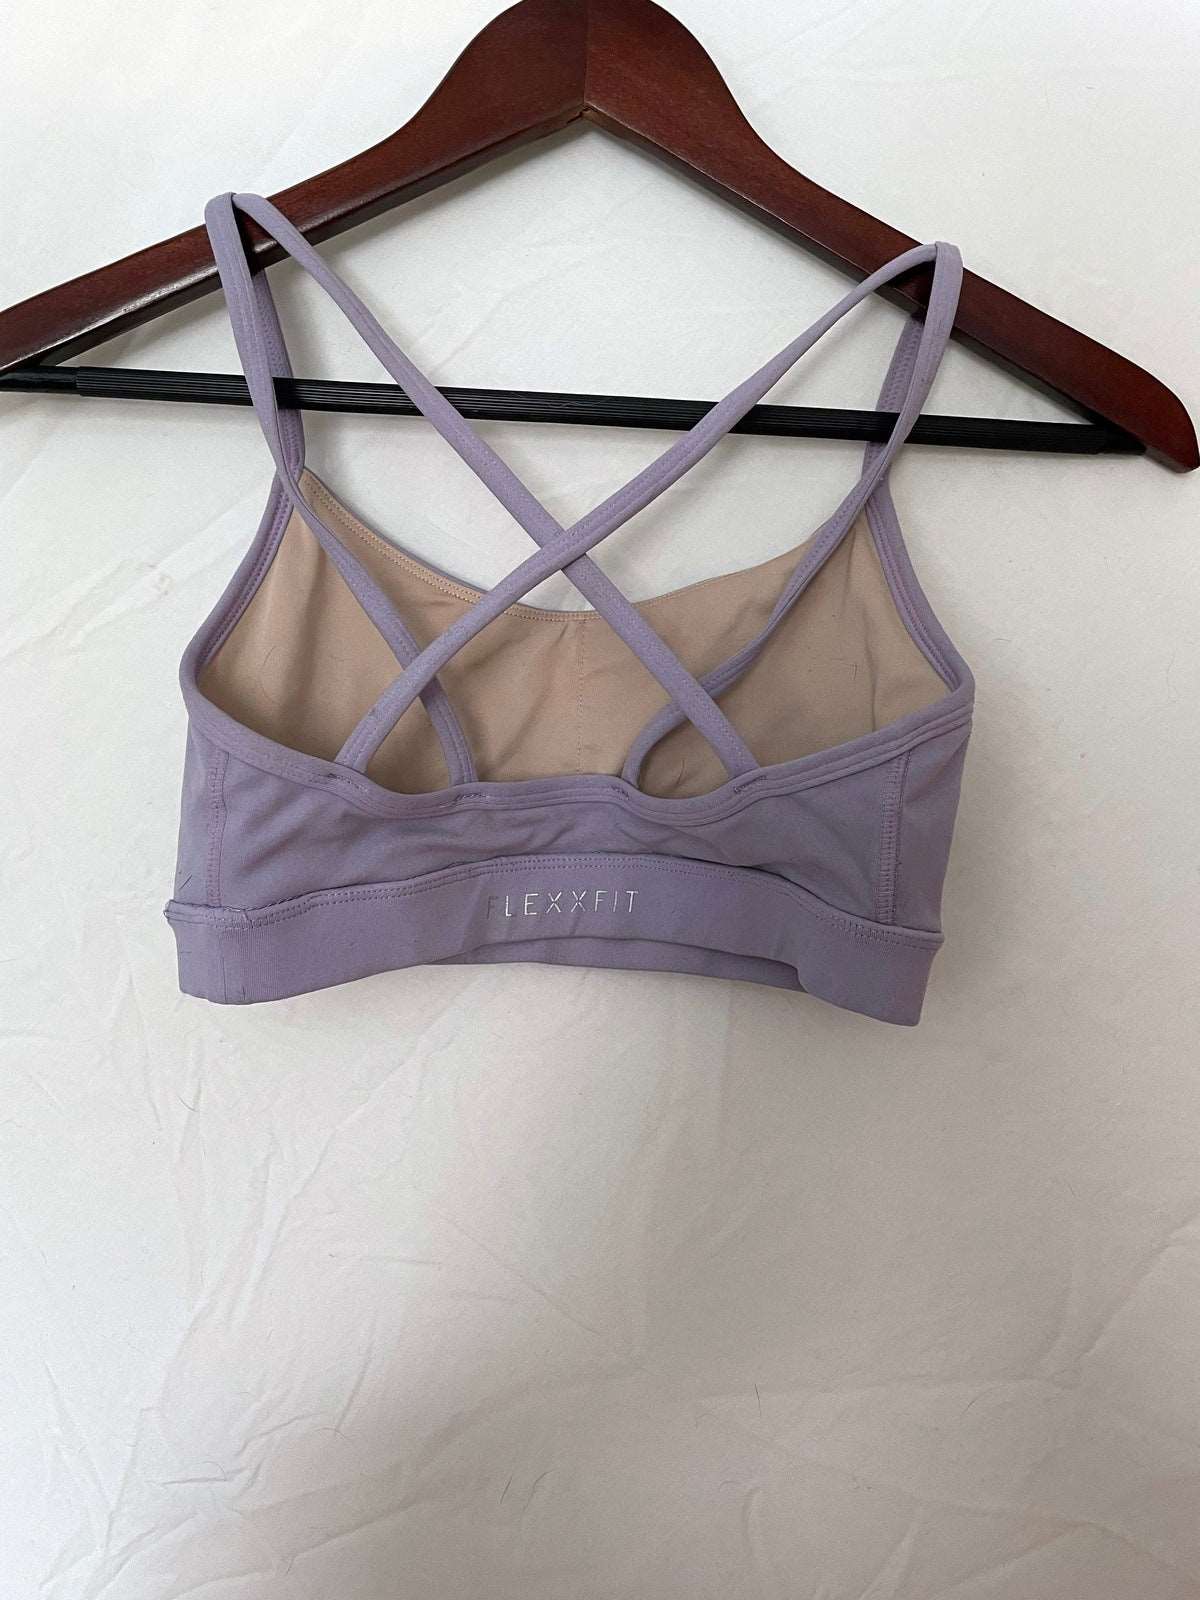 ThriftedEquestrian Clothing Small Two Pack Flexfit Sports Bras - Small